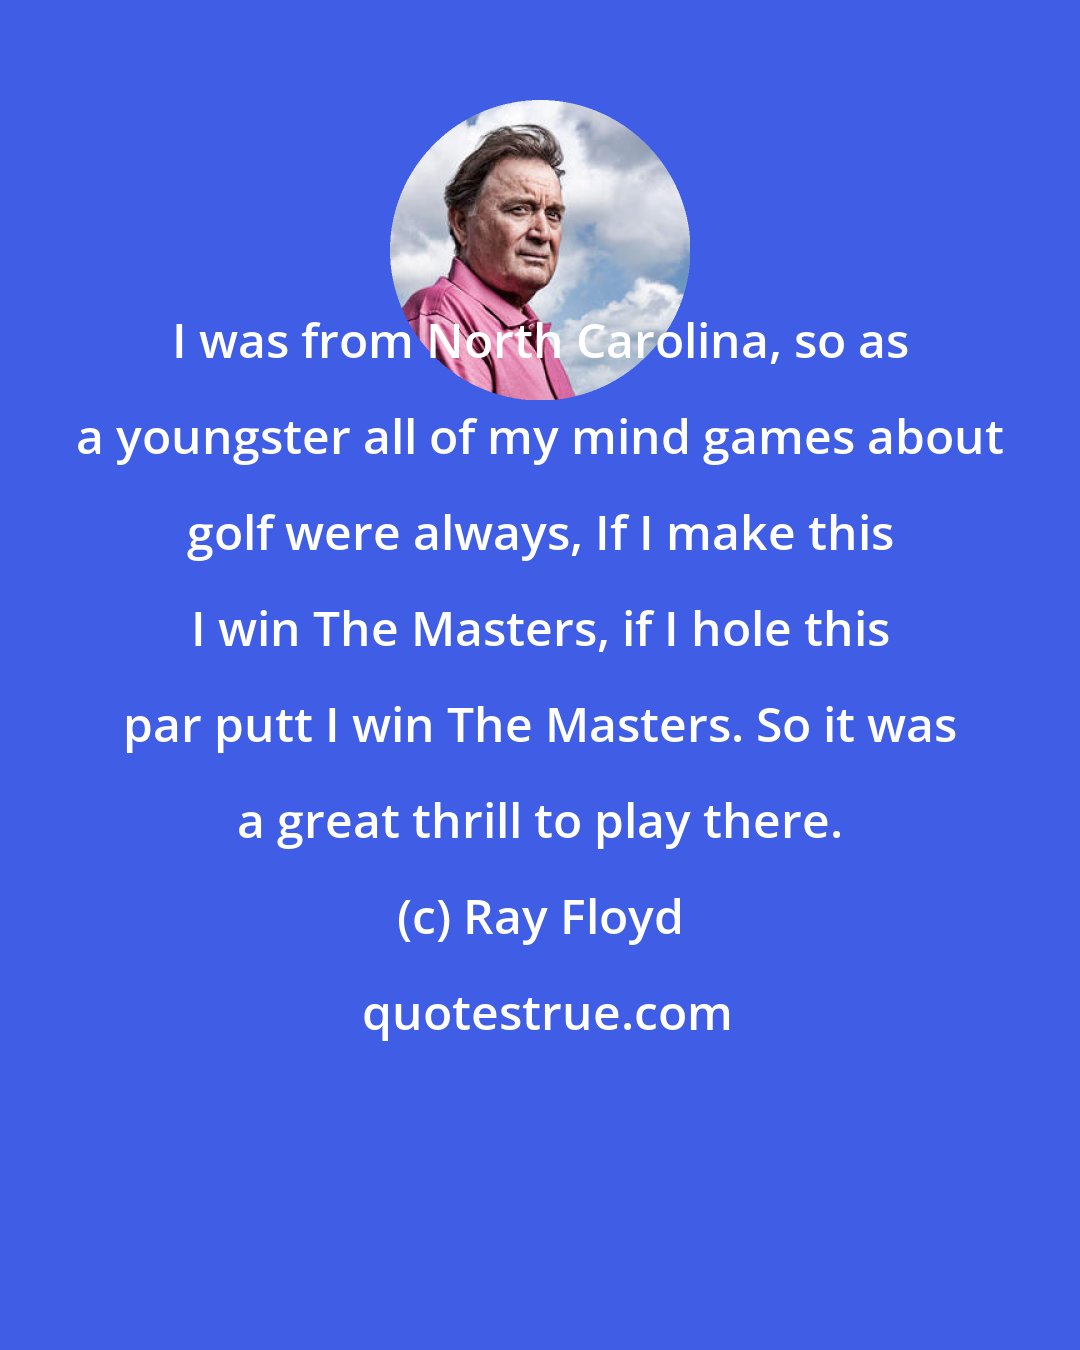 Ray Floyd: I was from North Carolina, so as a youngster all of my mind games about golf were always, If I make this I win The Masters, if I hole this par putt I win The Masters. So it was a great thrill to play there.